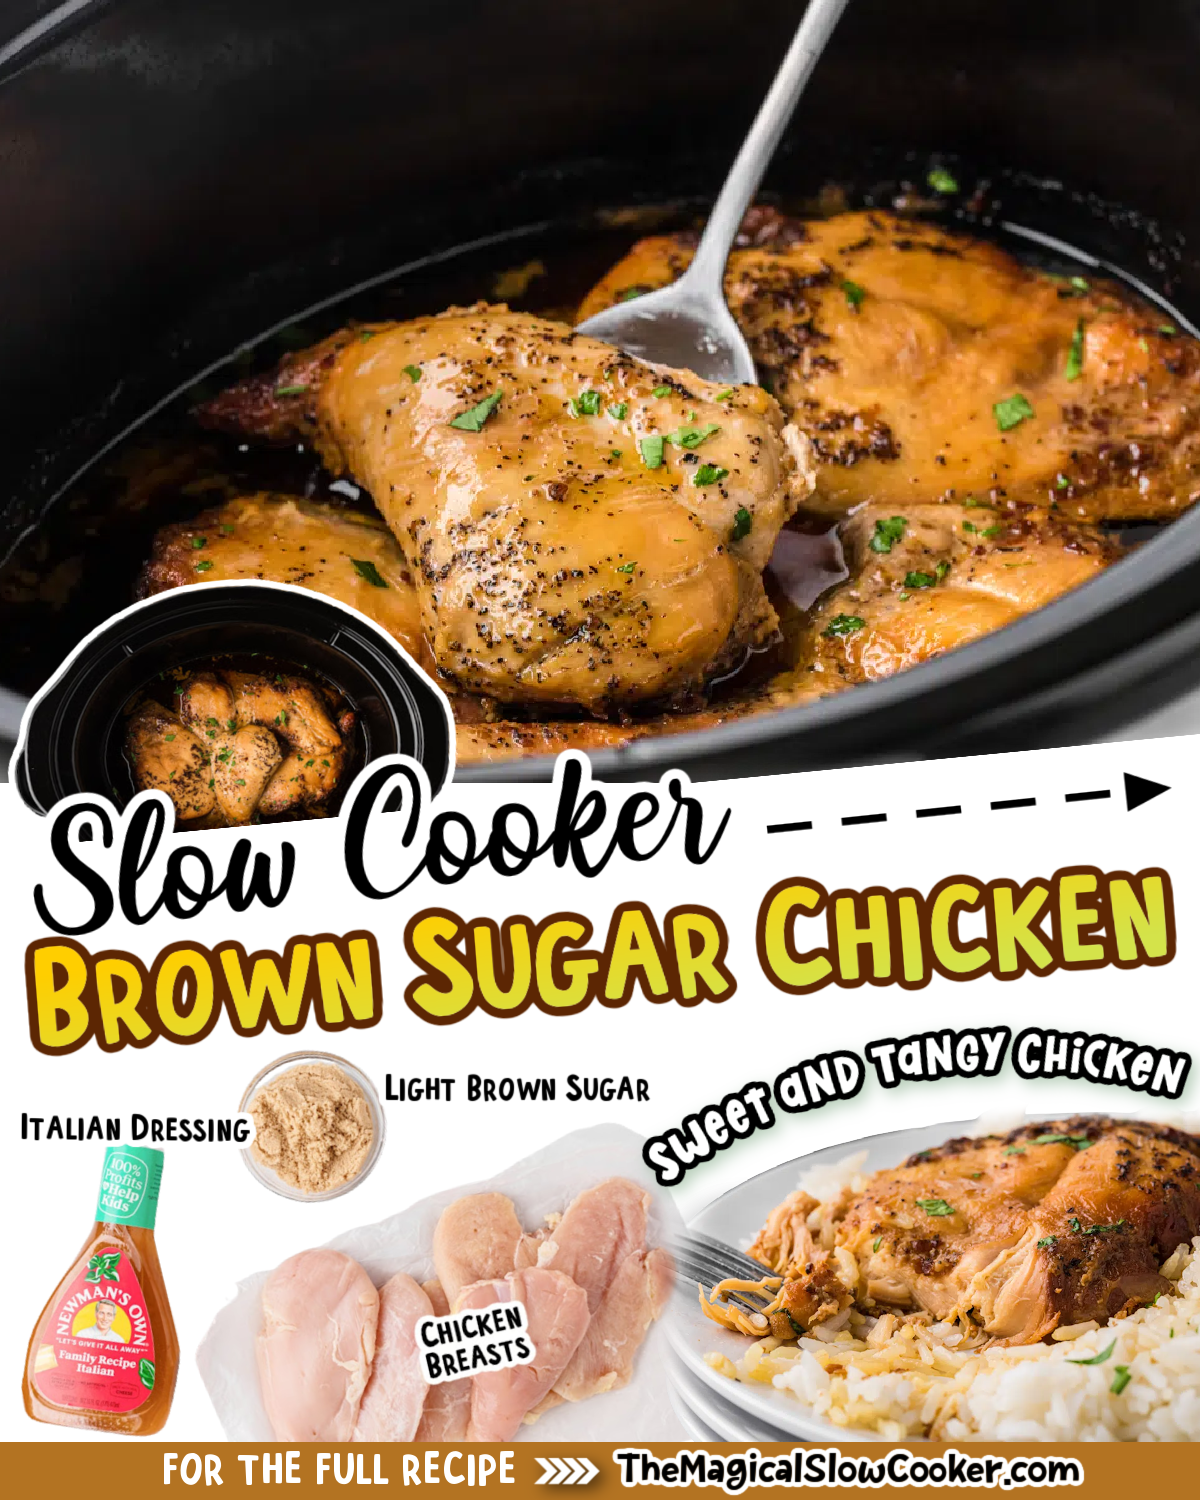 Brown sugar chicken images text of the ingredients for facebook and pinterest.